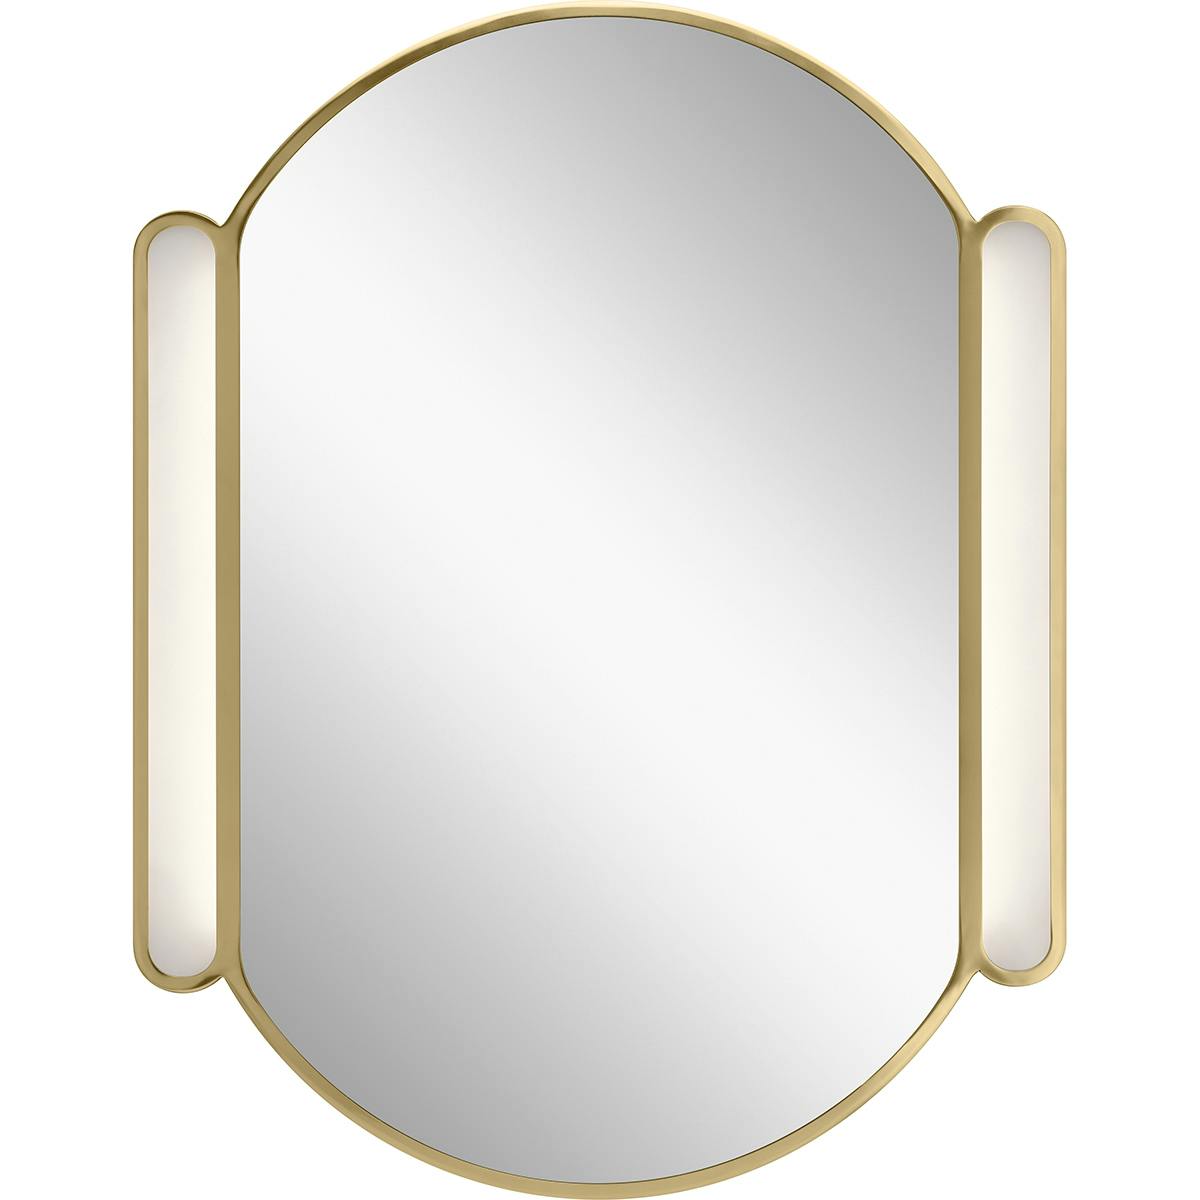 Front view of the Phaelan 30" Oval Mirror Champagne Gold on a white background